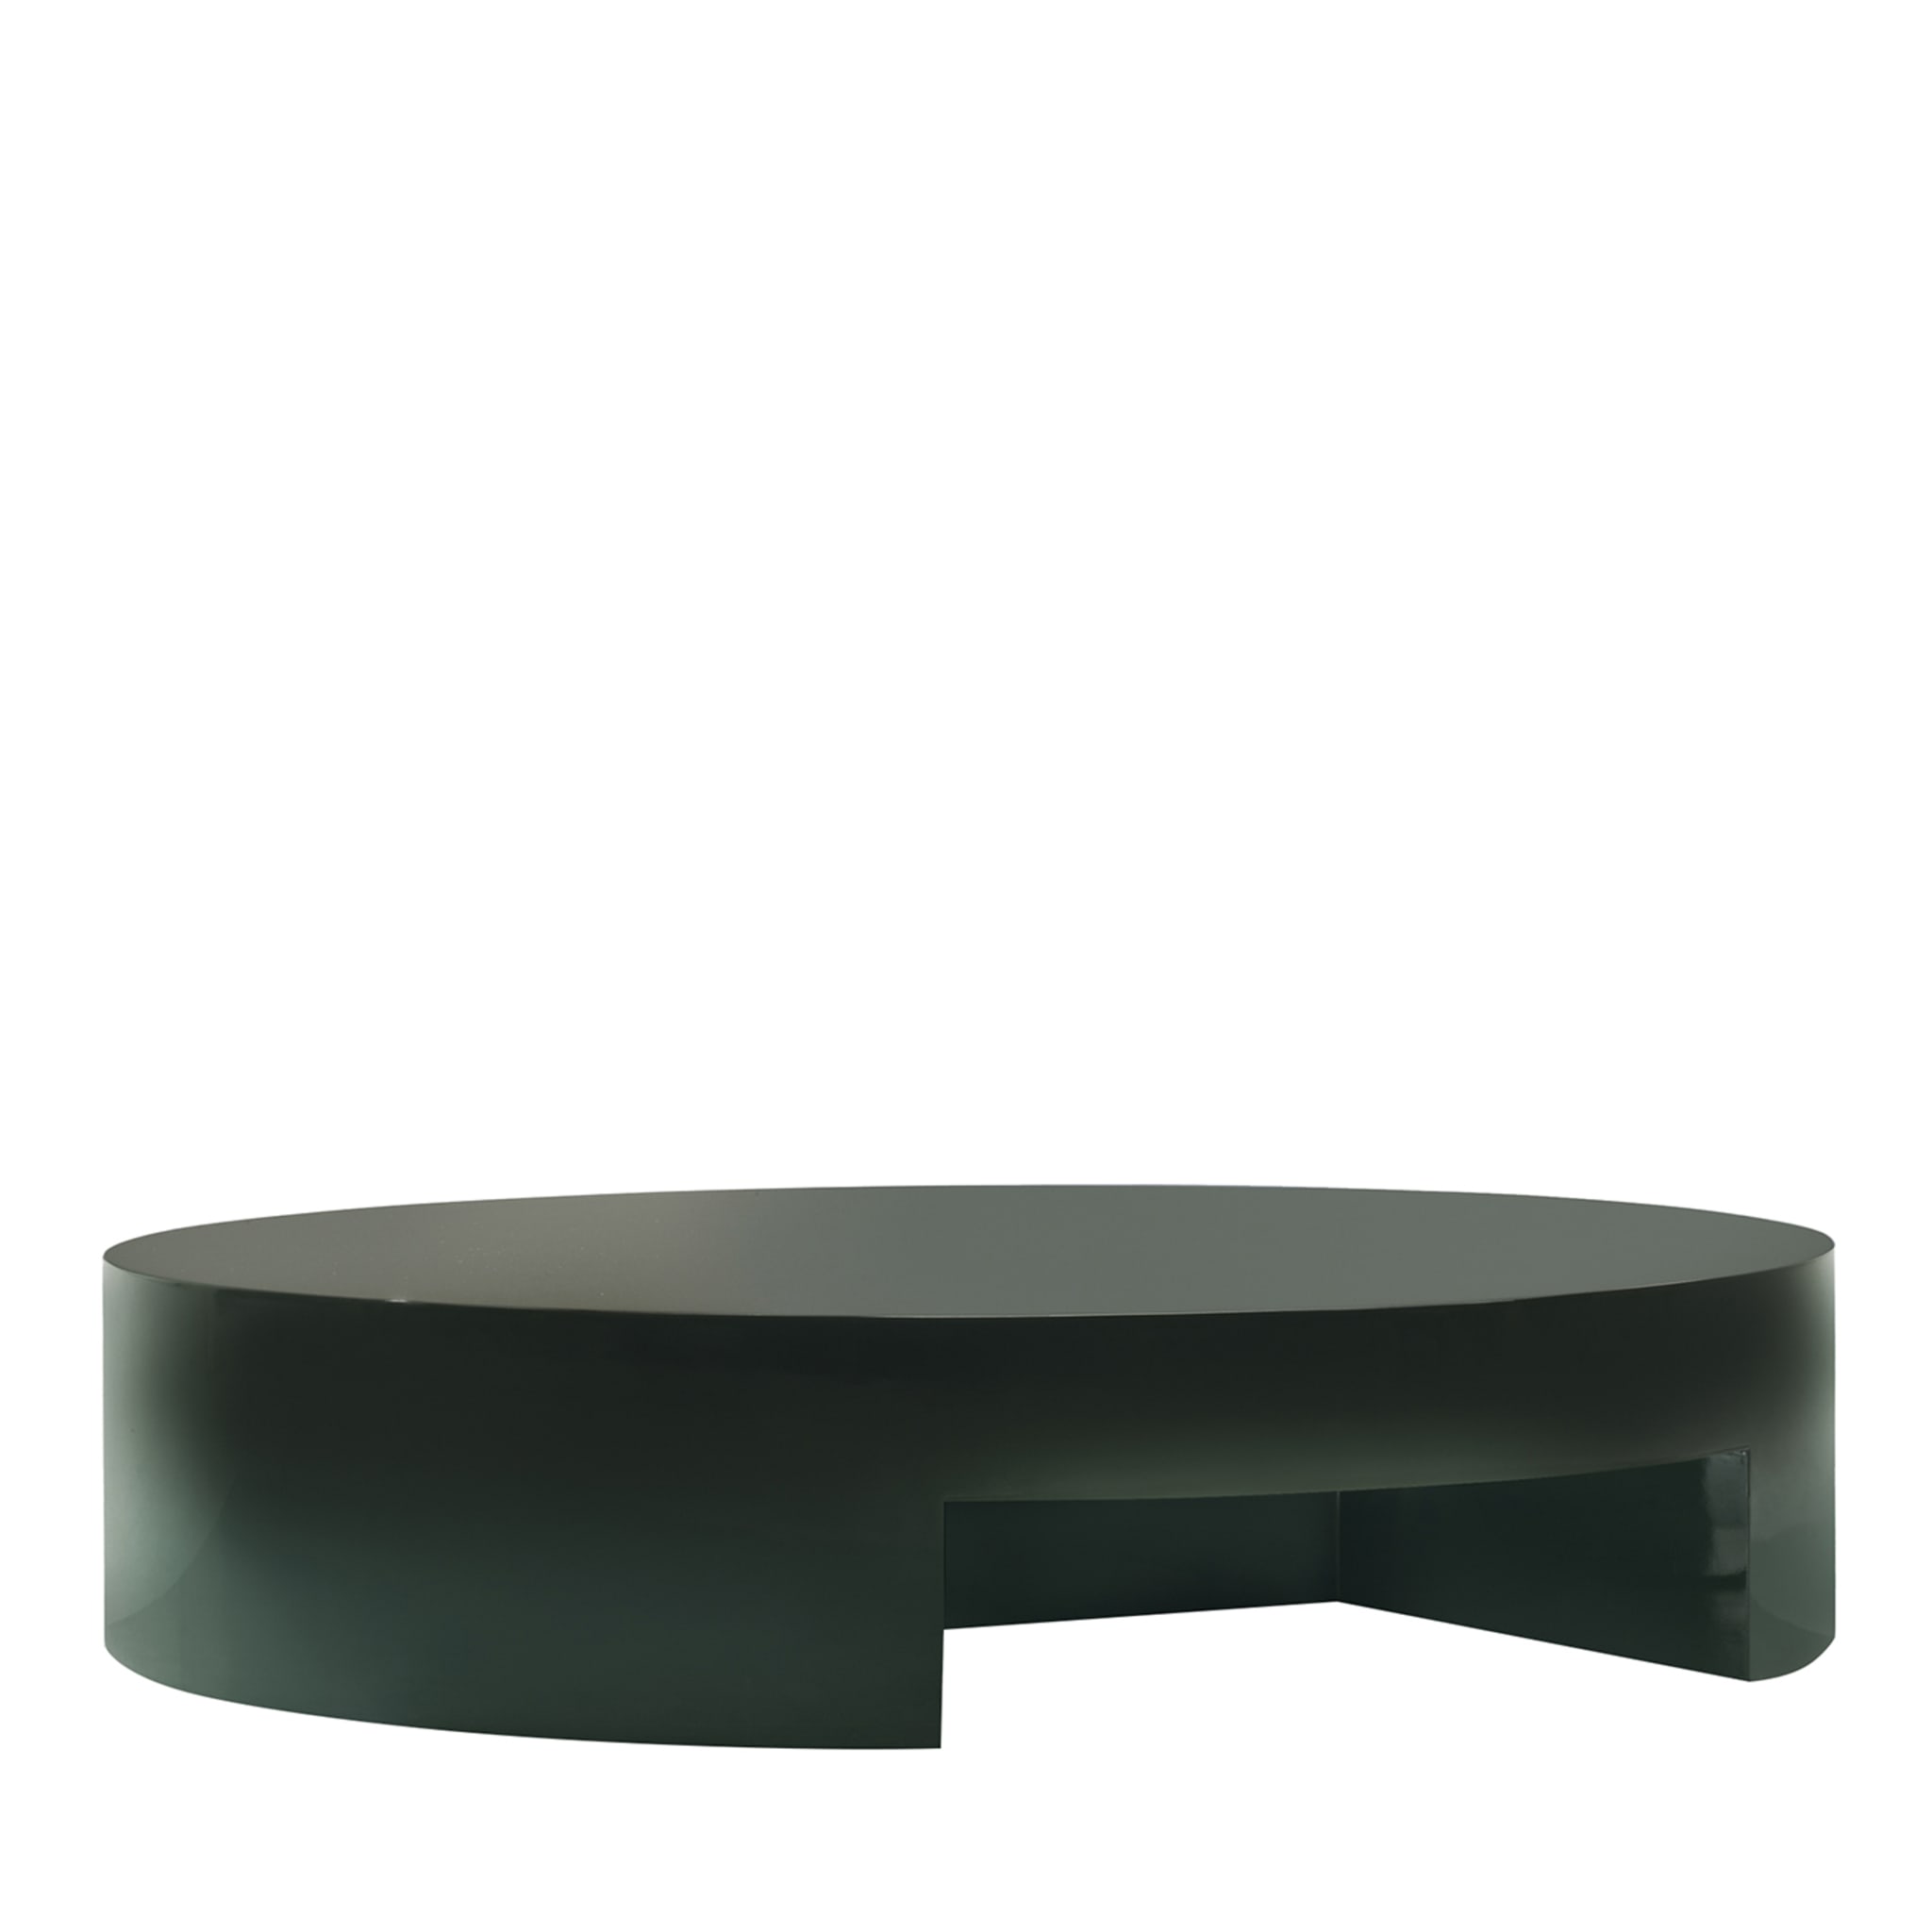 Maryland Green Coffee Table by Dainelli Studio - Main view